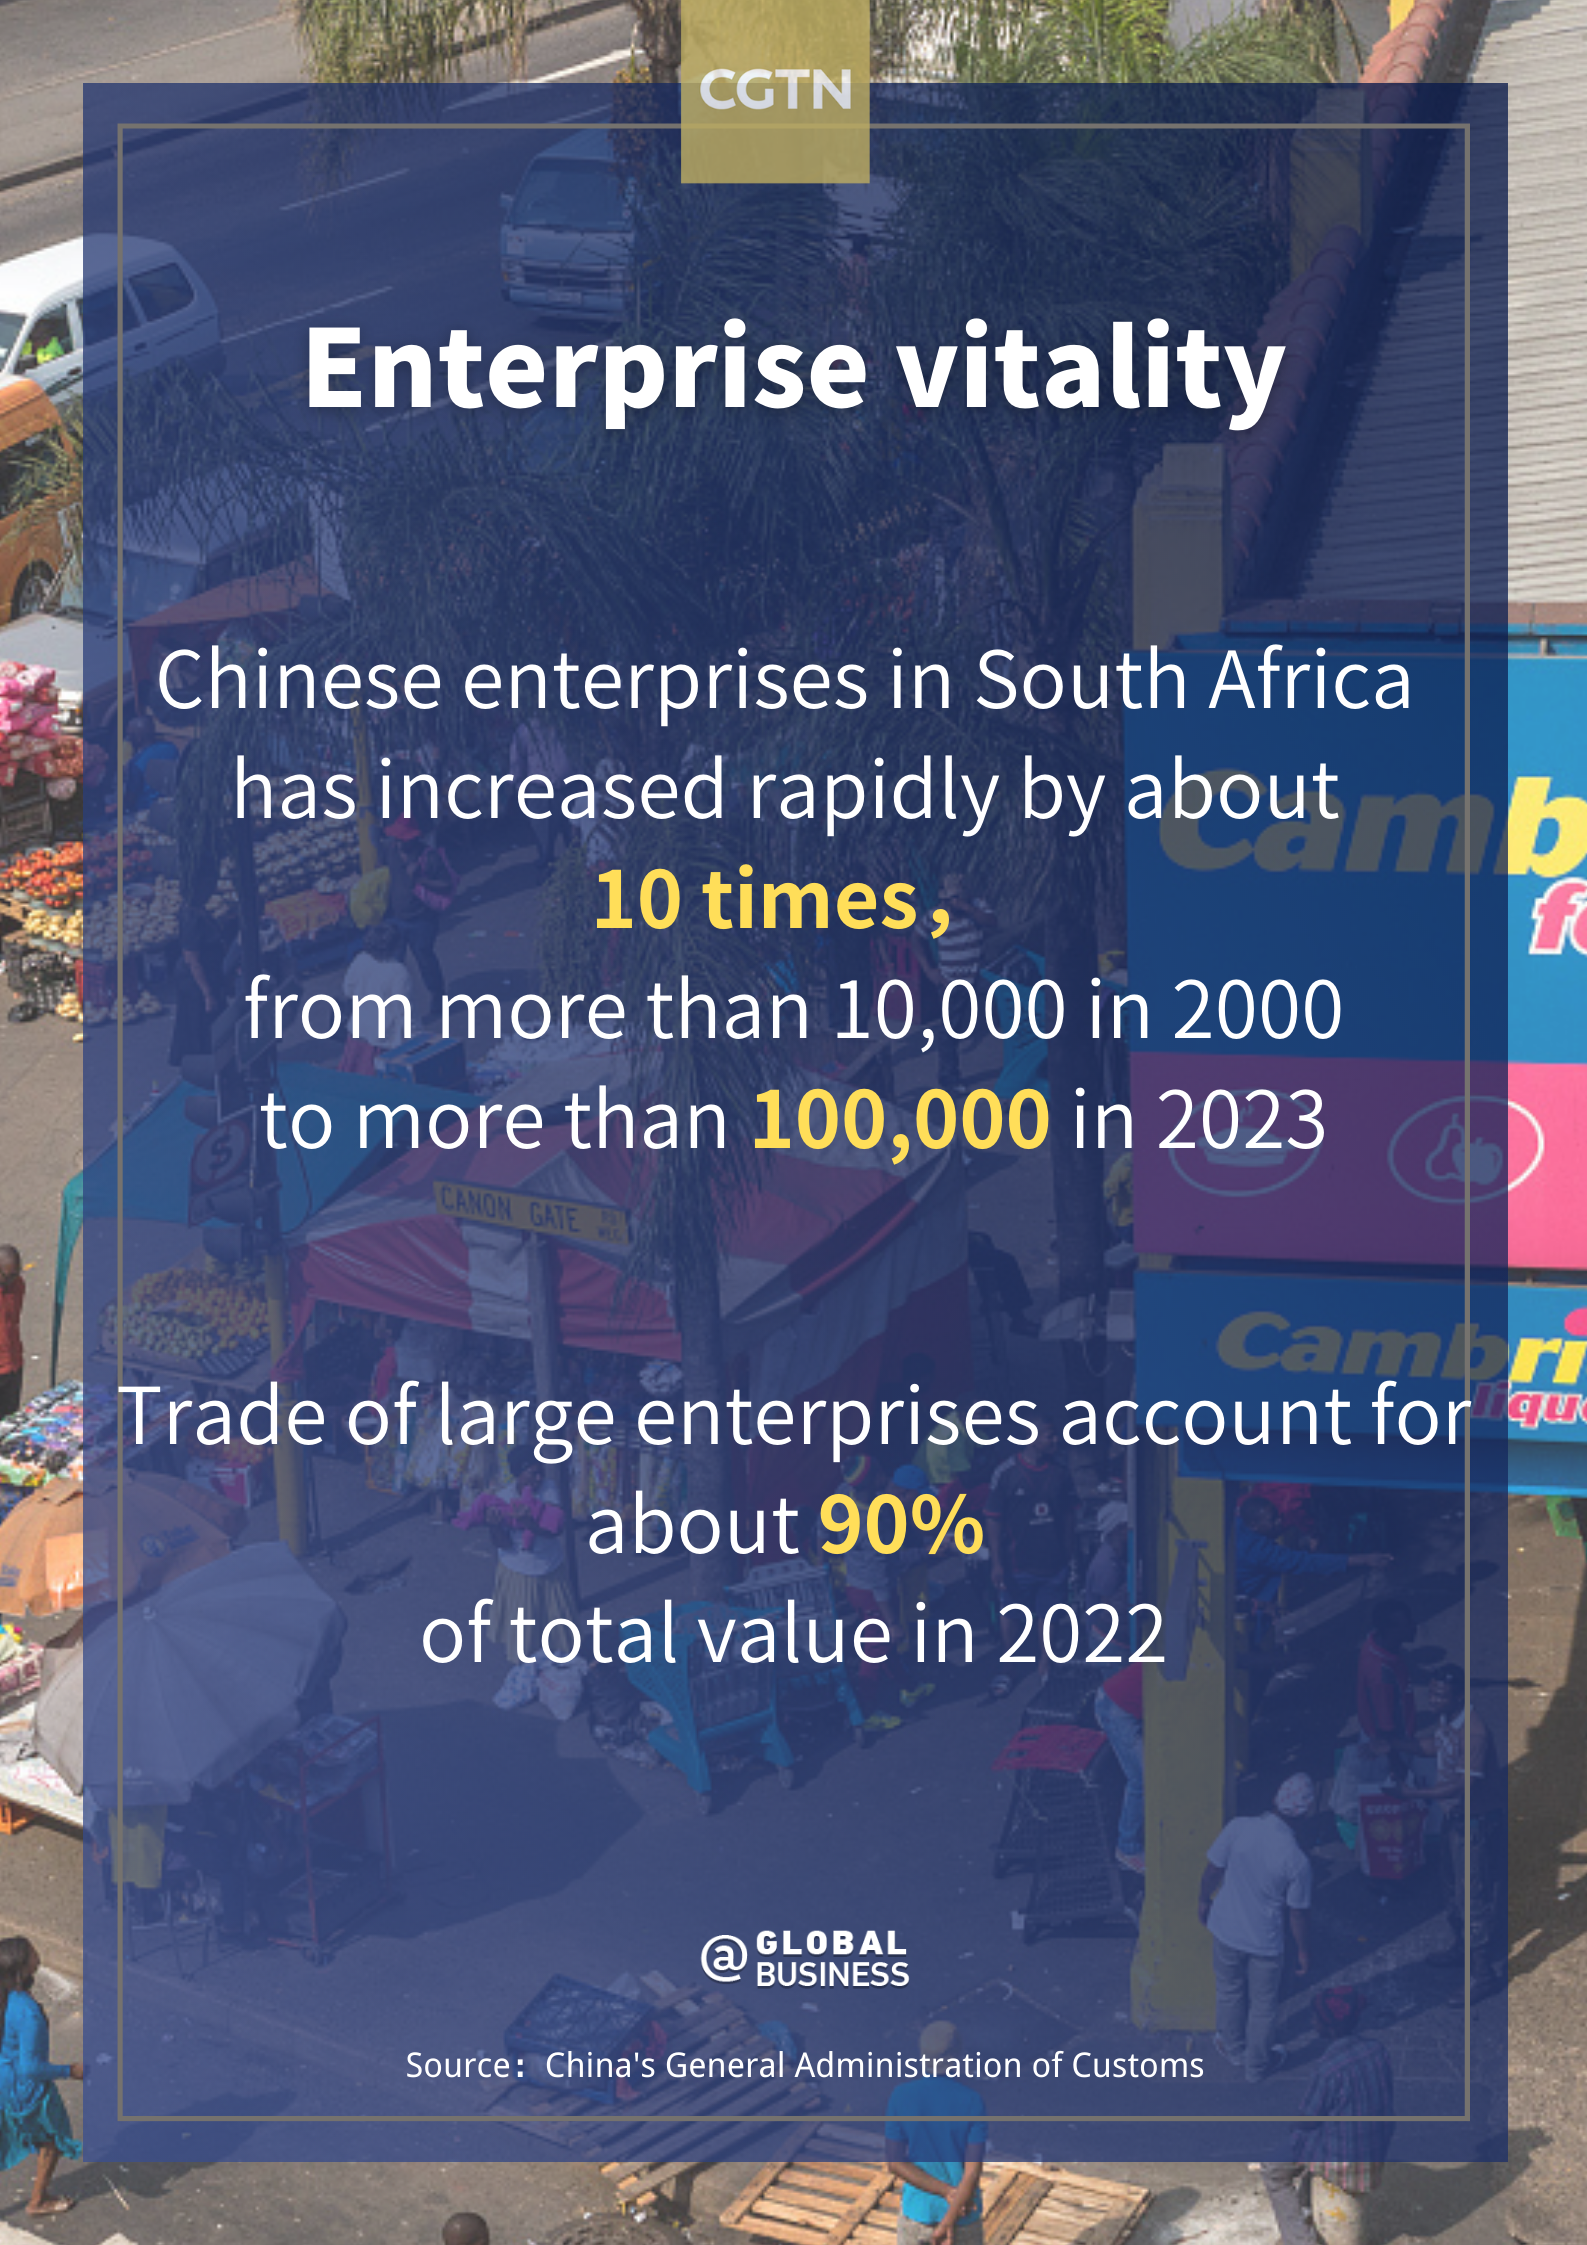 China-Africa trade develops rapidly